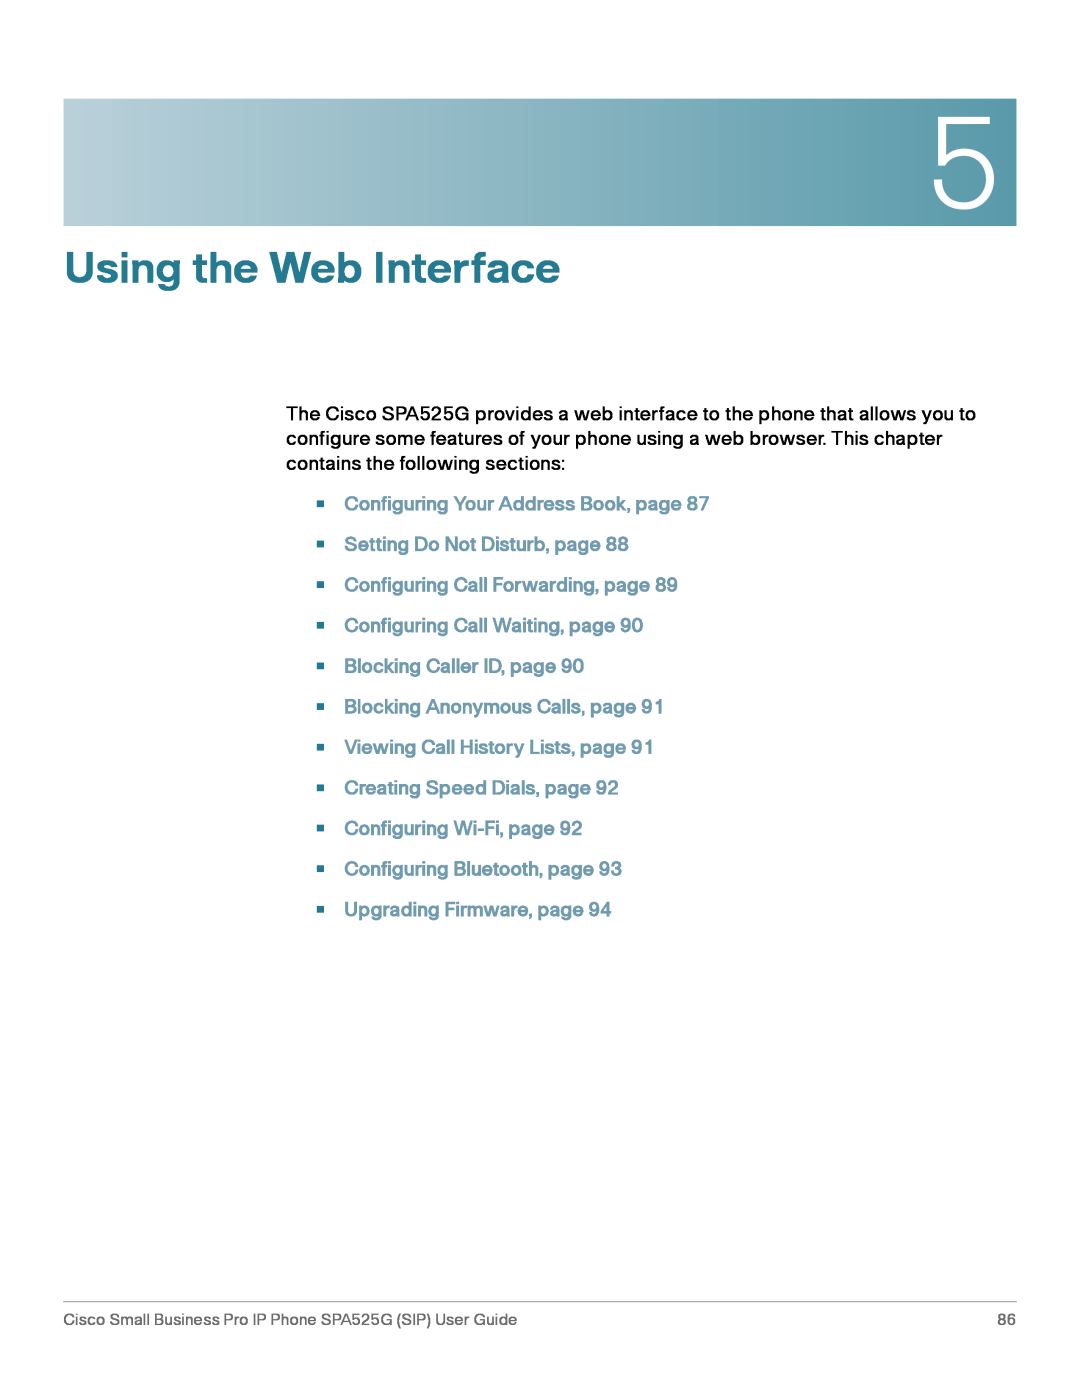 Cisco Systems SPA525G manual Using the Web Interface 